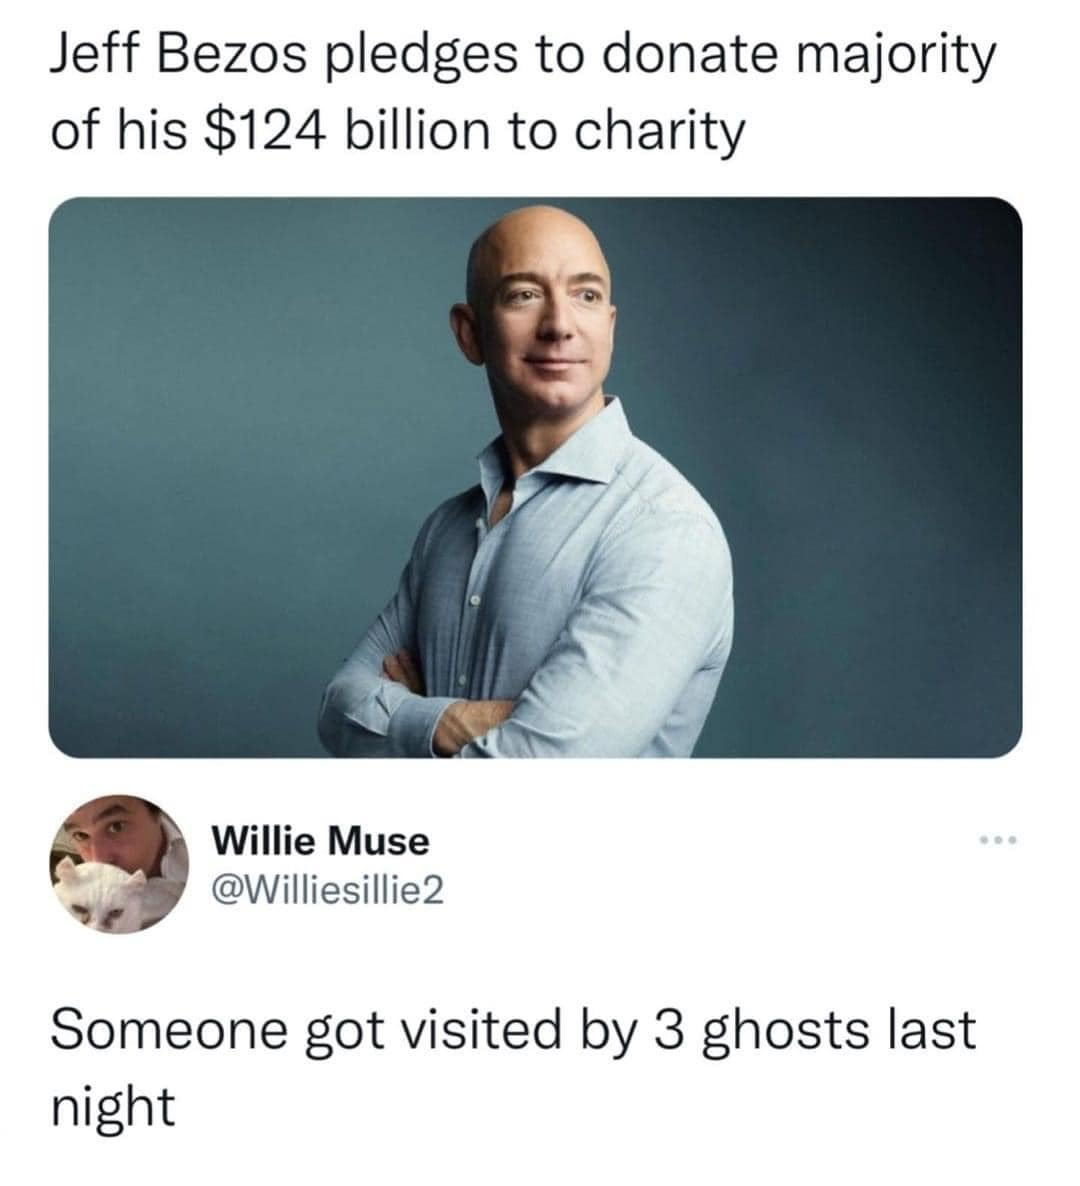 May be a Twitter screenshot of 2 people and text that says 'Jeff Bezos pledges to donate majority of his $124 billion to charity Willie Muse @Williesillie2 Someone got visited by 3 ghosts last night'